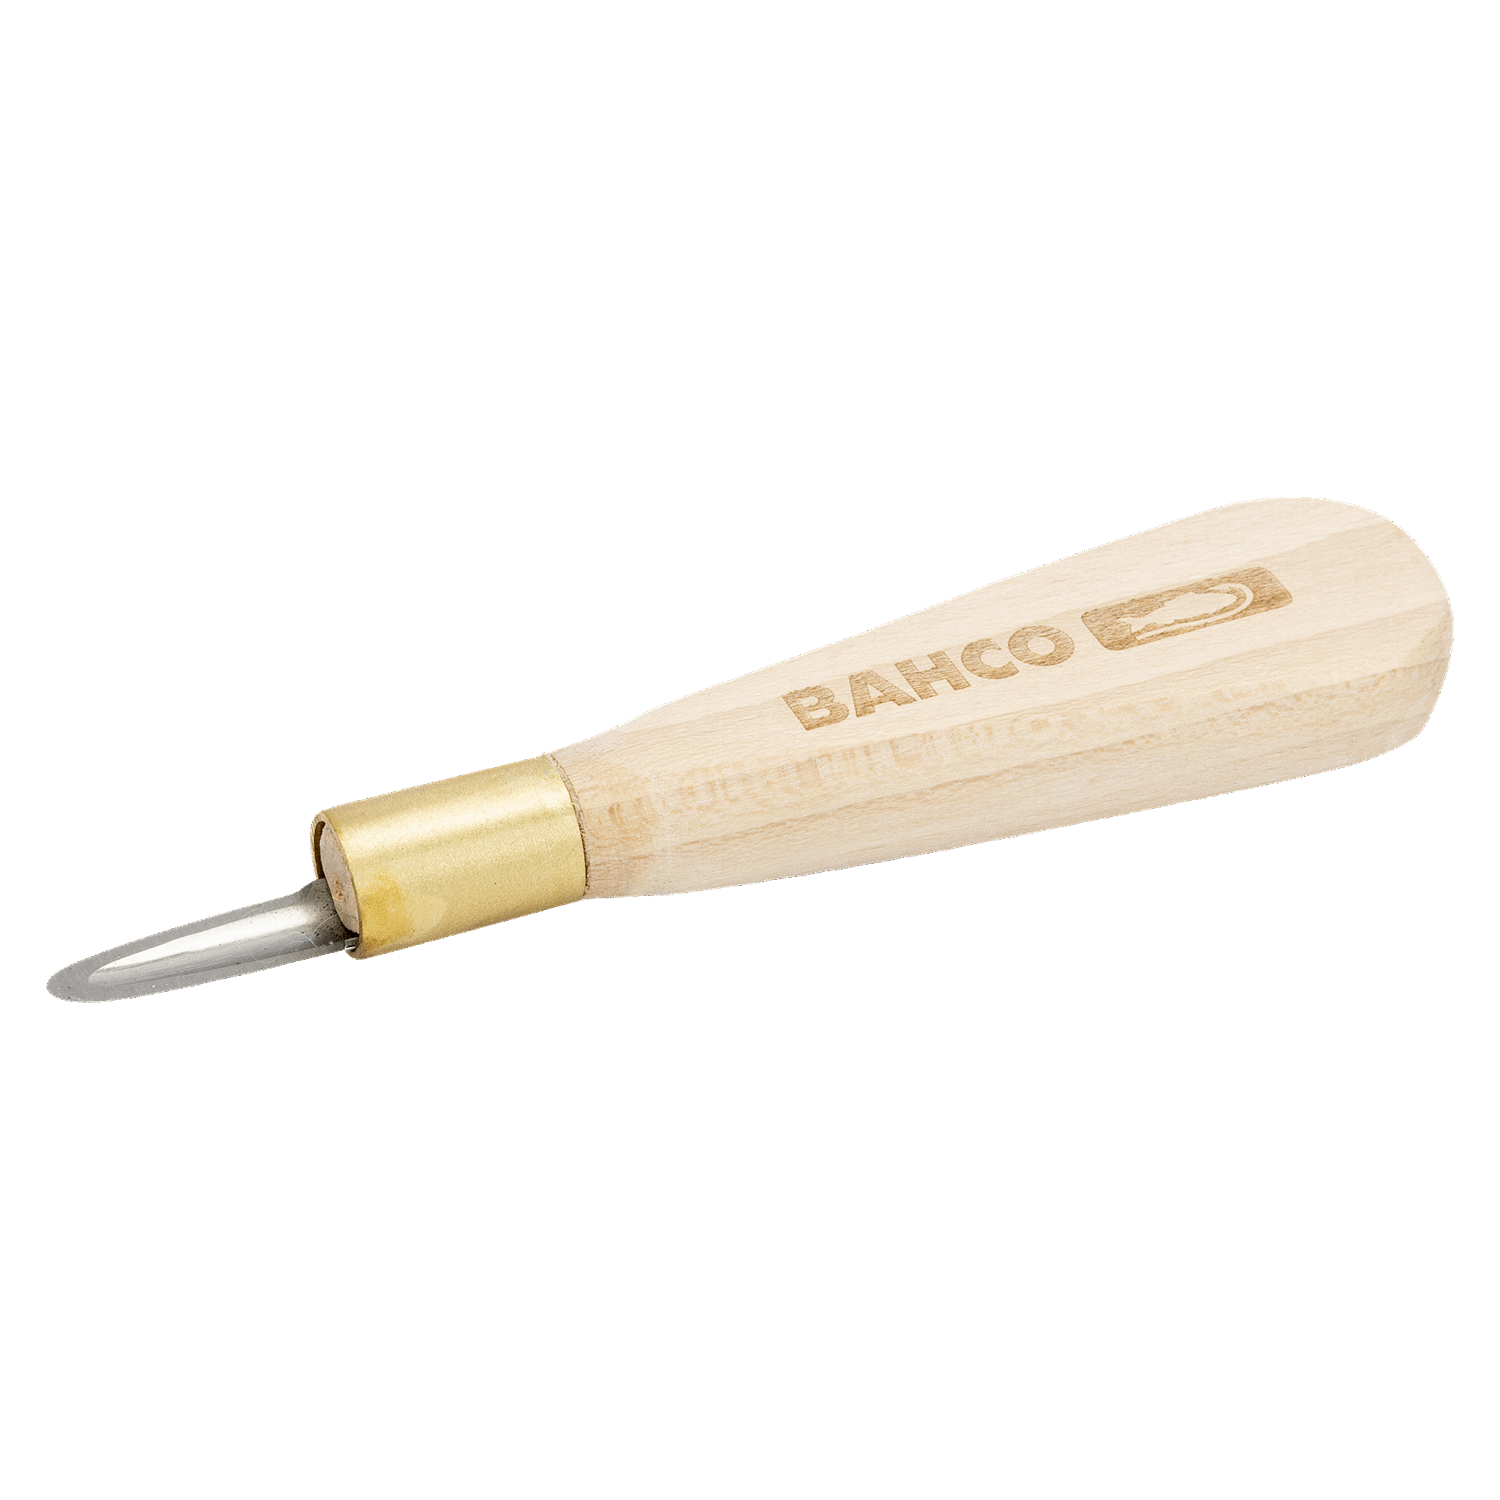 BAHCO 2820EK-01 Electrician Pinch Knife with Wooden Handle - Premium Electrician Pinch Knife from BAHCO - Shop now at Yew Aik.